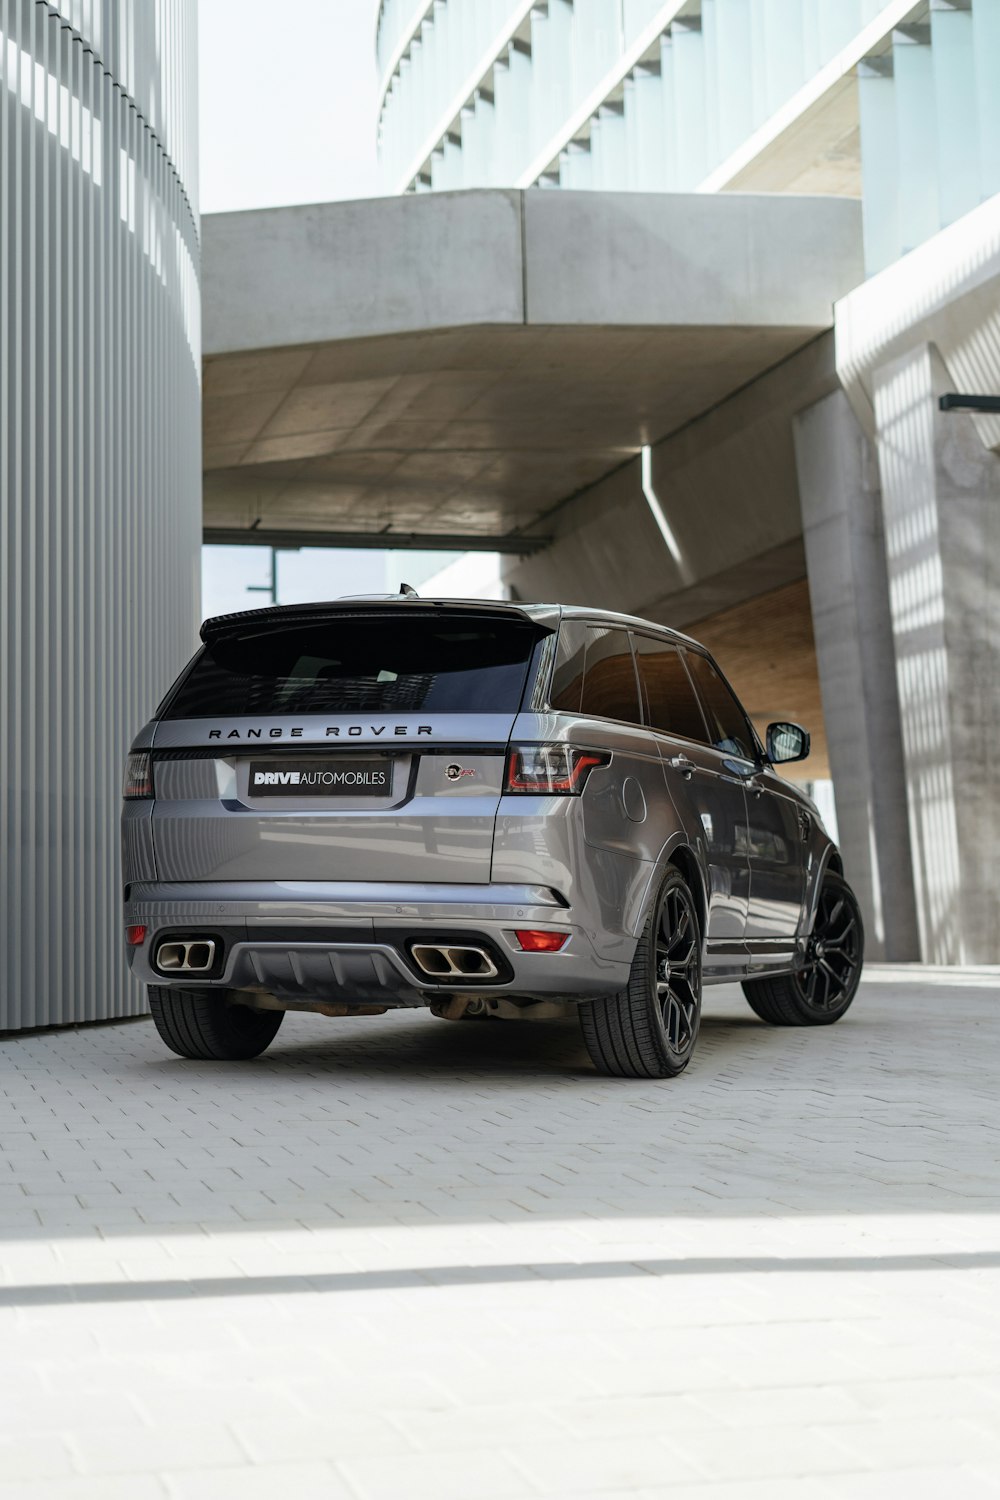 a grey range rover parked in front of a building